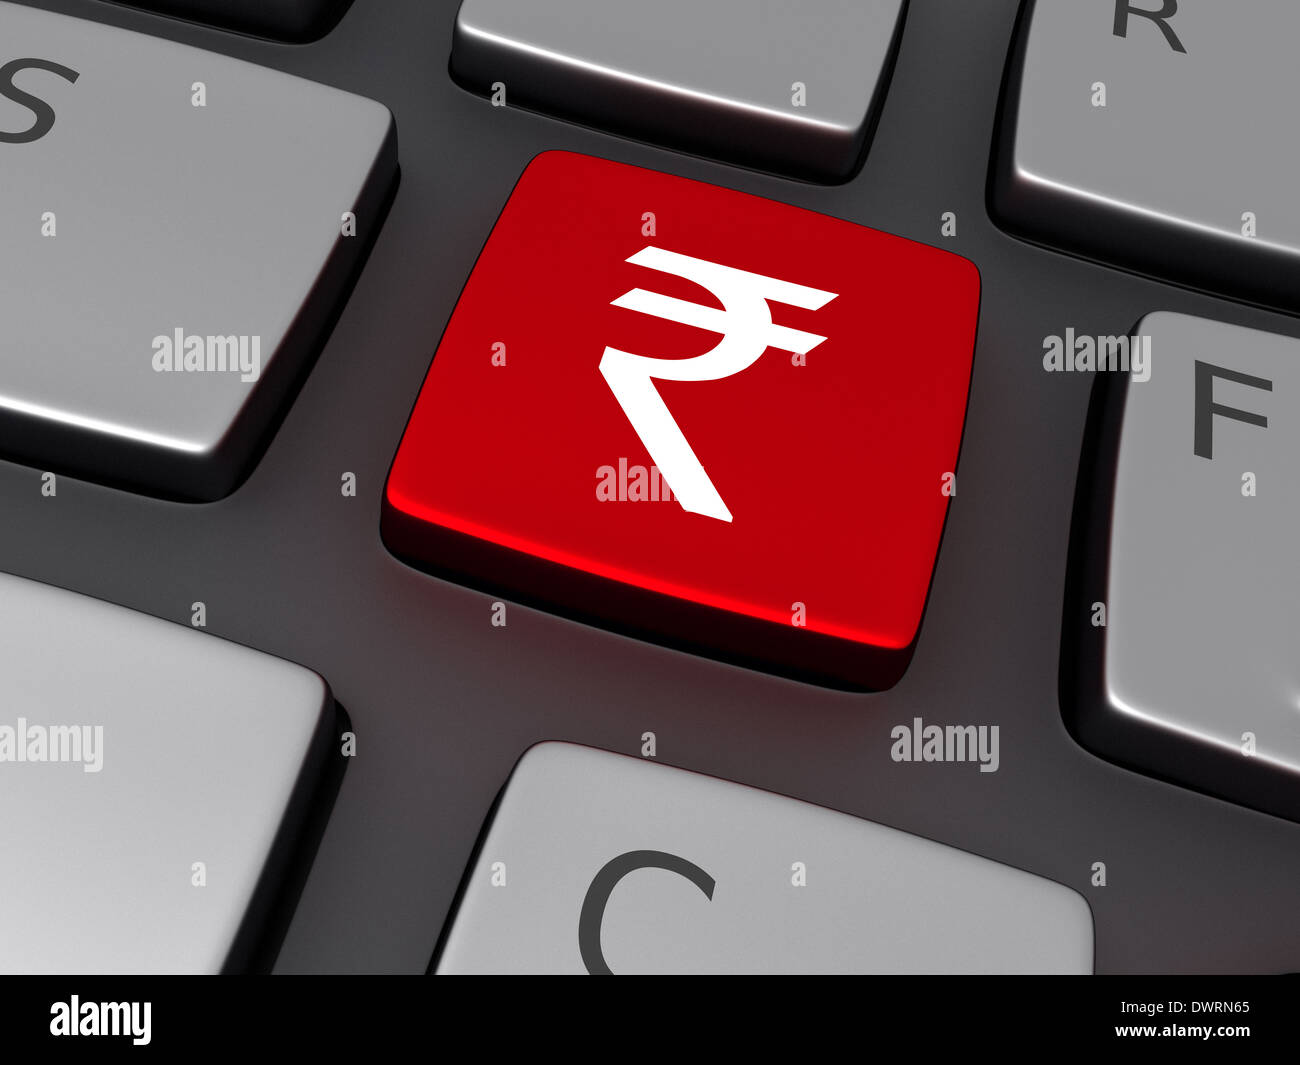 Illustrative image of rupee sign on keyboard representing online shopping Stock Photo